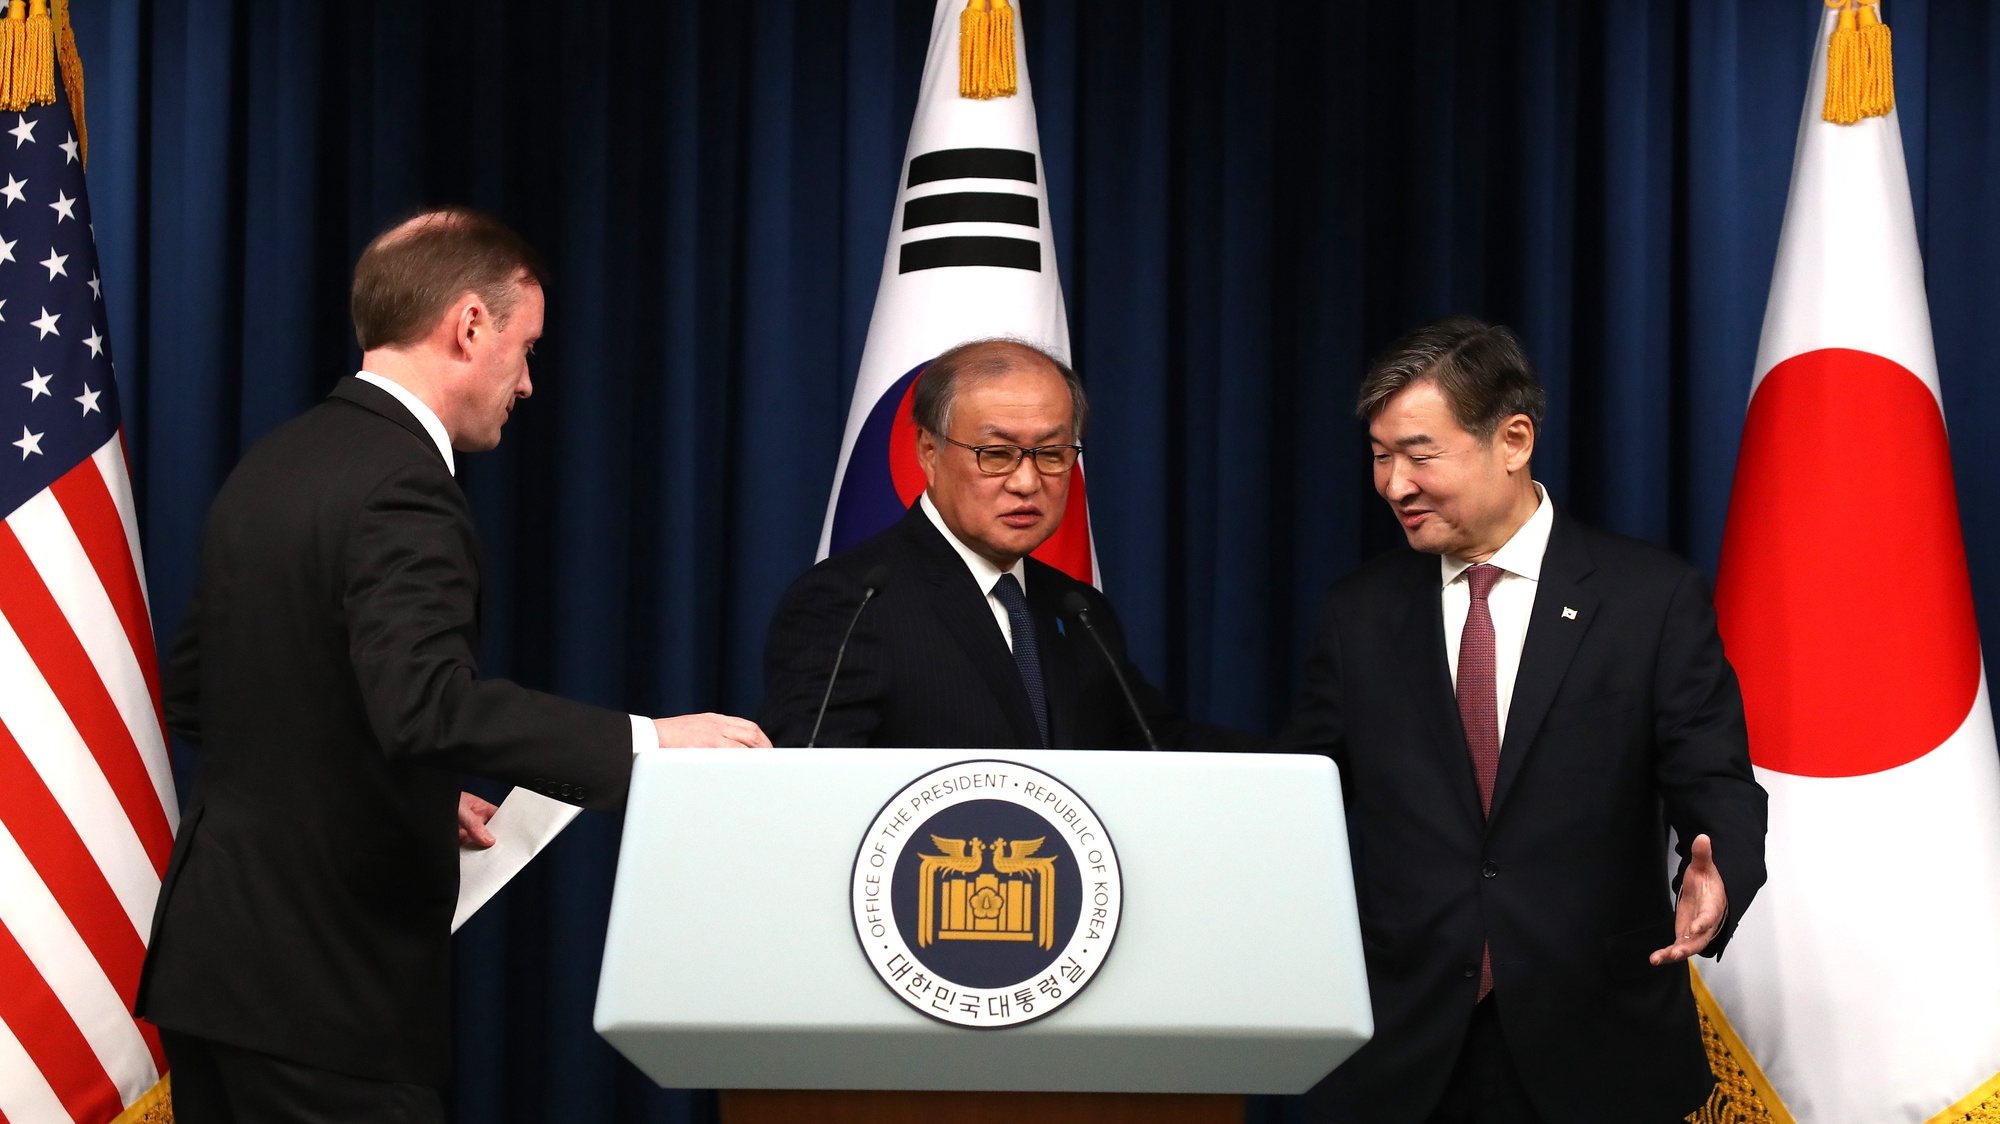 epa11018348 South Korea&#039;s National Security Adviser Cho Tae-yong (C), U.S. National Security Advisor Jake Sullivan (L) and Japan&#039;s National Security Secretariat Secretary-General Takeo Akiba (R) leave after their the joint press conference at the presidential office, in Seoul, South Korea, 09 December 2023. The meeting comes as the three countries are stepping up cooperation amid North Korea&#039;s persistent military threats and Russia&#039;s protracted war in Ukraine.  EPA/Chung Sung-Jun / POOL SOUTH KOREA OUT *** Local Caption *** SEOUL, SOUTH KOREA - DECEMBER 09: Japan&#039;s National Security Secretariat Secretary-General Takeo Akiba attends the joint press conference with U.S. National Security Advisor Jake Sullivan and South Korea&#039;s National Security Adviser Cho Tae-yong at the presidential office on December 09, 2023 in Seoul, South Korea. The meeting comes as the three countries are stepping up cooperation amid North Korea&#039;s persistent military threats and Russia&#039;s protracted war in Ukraine. (Photo by Chung Sung-Jun/Getty Images)